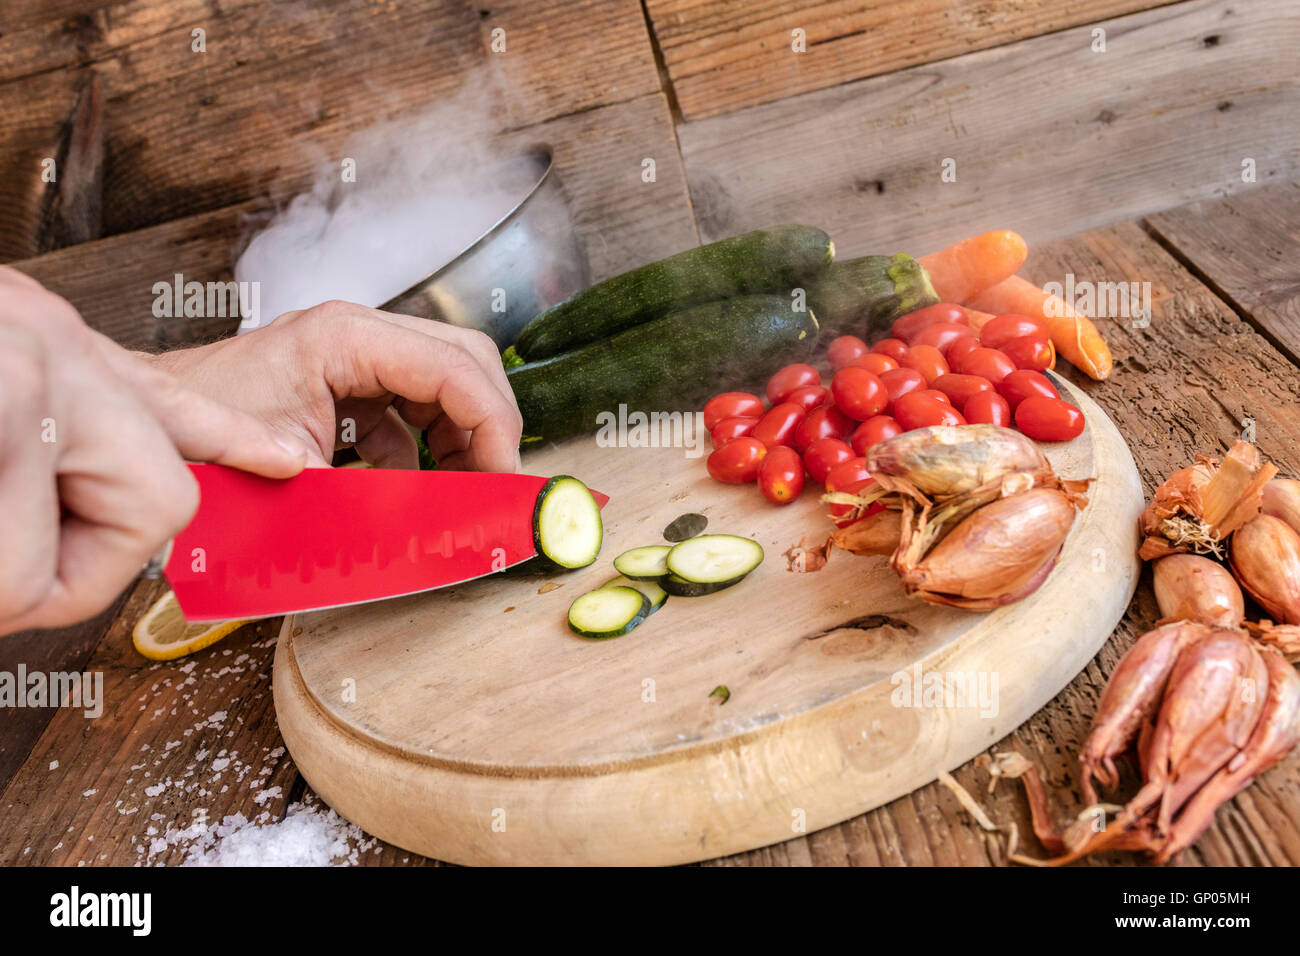 Chef cuts fresh vegetables essential ingredients of typical and healthy Italian cuisine Stock Photo